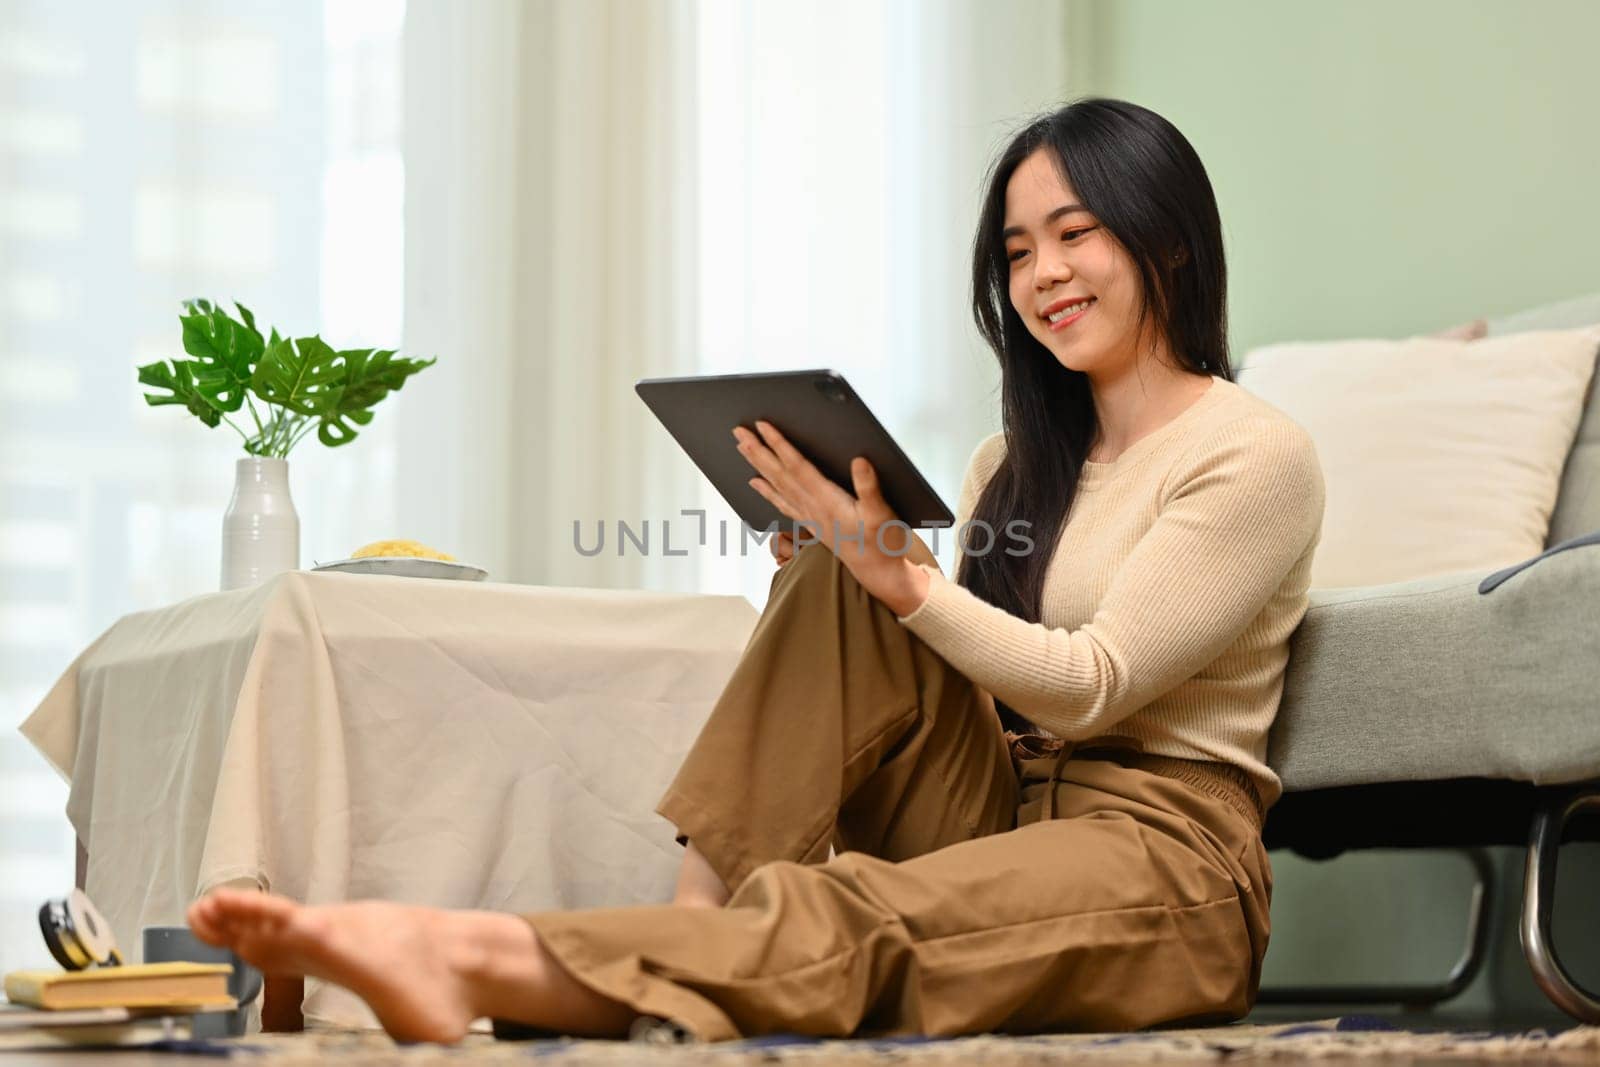 Charming young woman using digital tablet while sitting on floor in living room. Technology and lifestyle concept by prathanchorruangsak